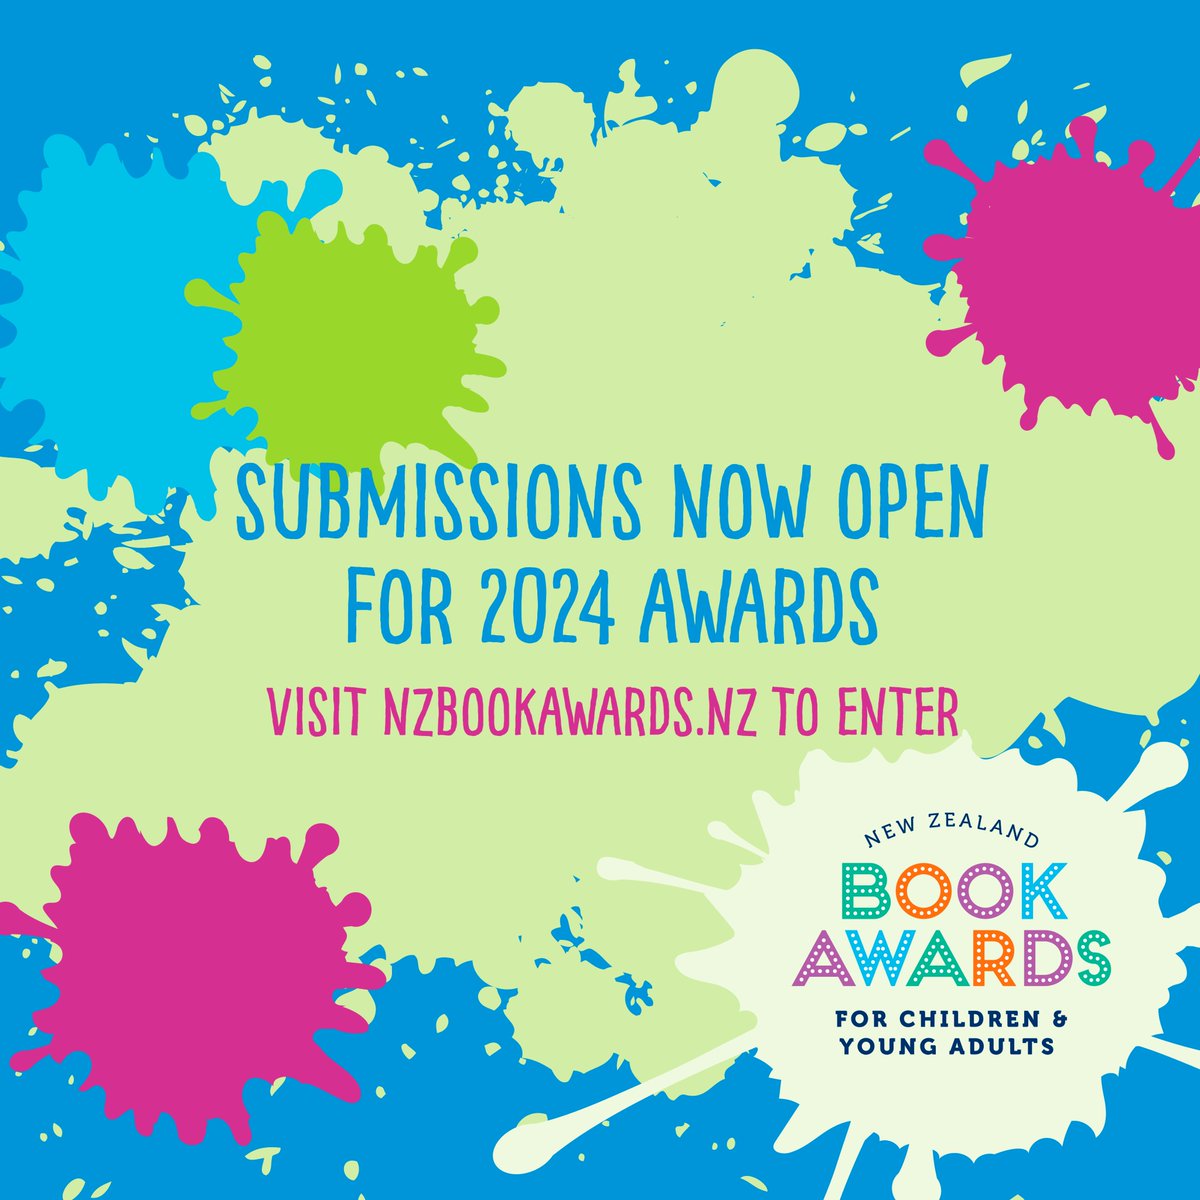 🏆 Entries are now open for the 2024 New Zealand Book Awards for Children and Young Adults, with an increase in the prize money on offer! 

👉 Get all the details here: nzbookawards.nz/new-zealand-bo…

#NZCYA #BooksAlive